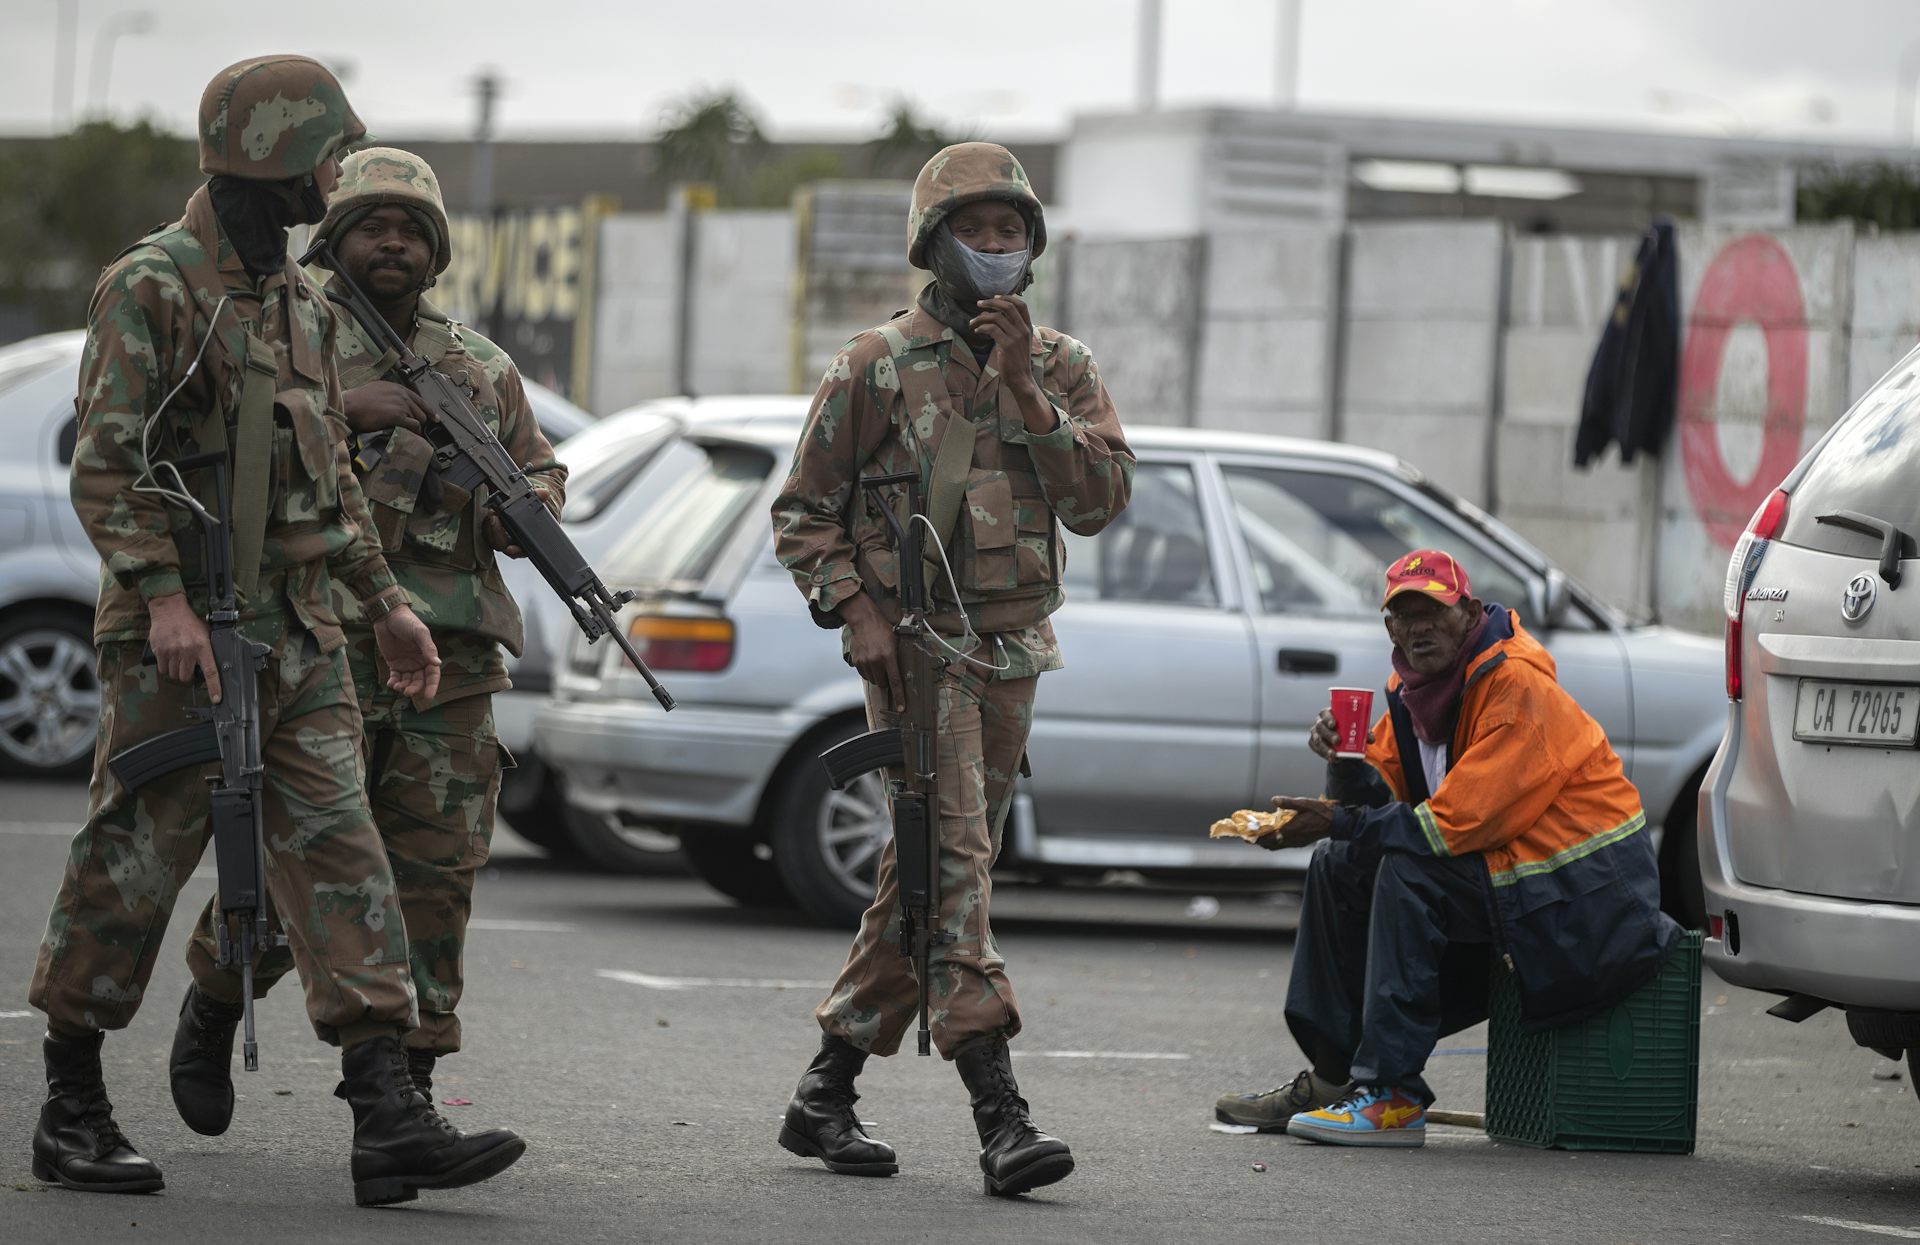 South Africa’s Military Is Not Suited for the Fight Against COVID-19. Here’s Why